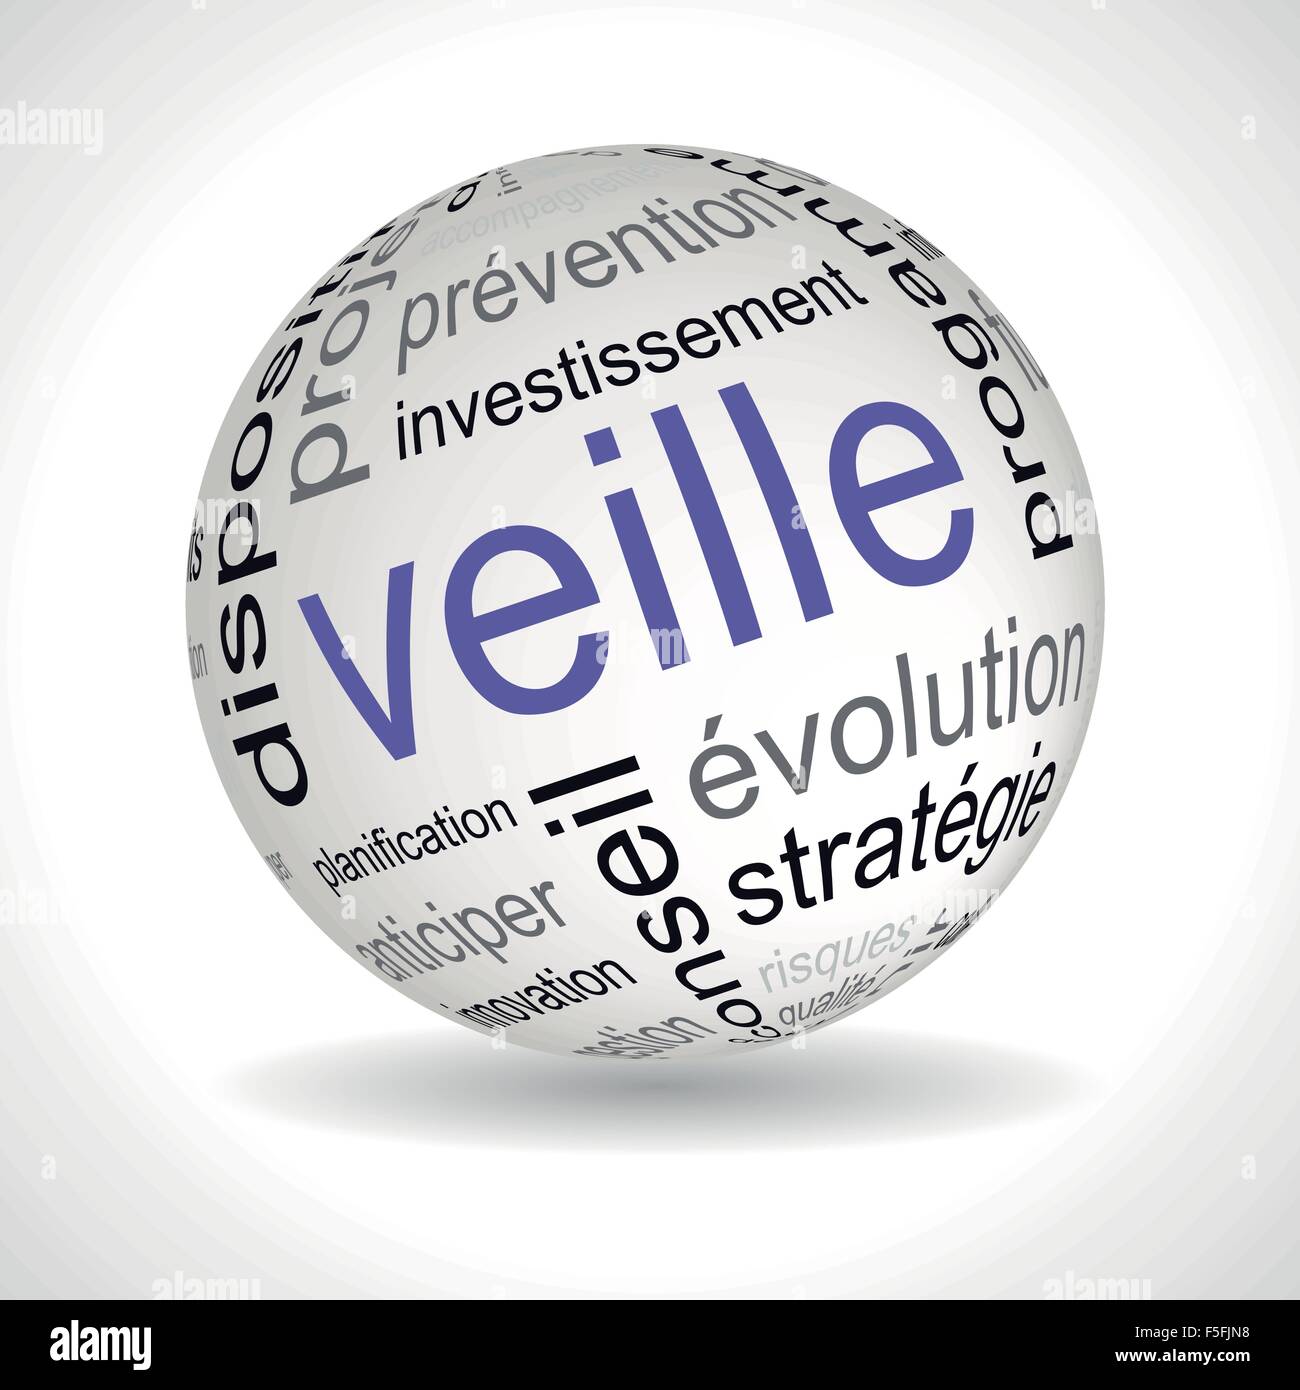 French business watch theme sphere with keywords full vector Stock Vector